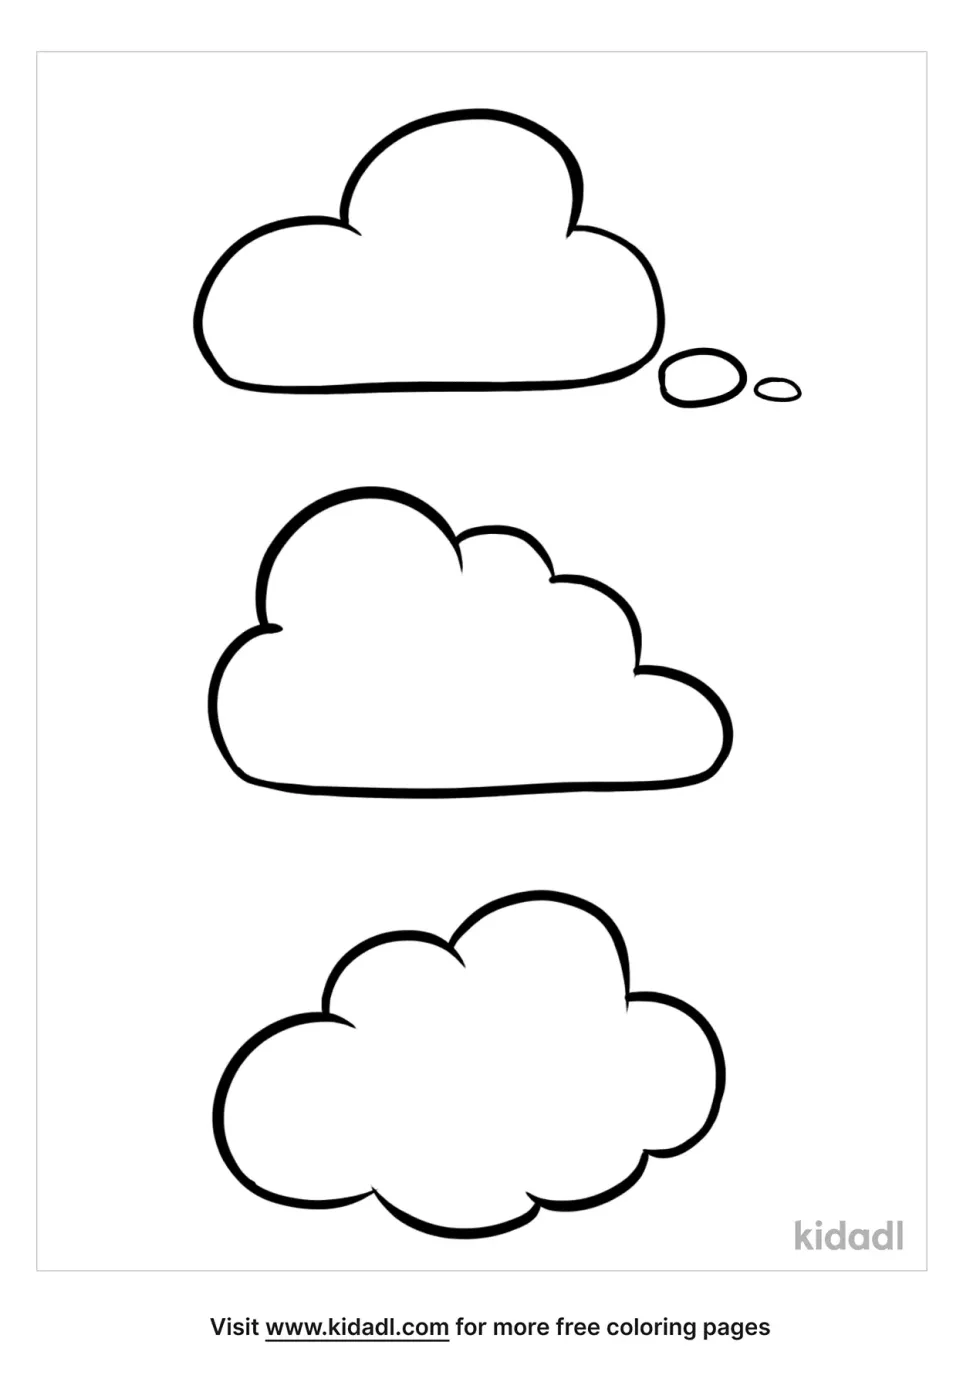 3 Types Of Clouds